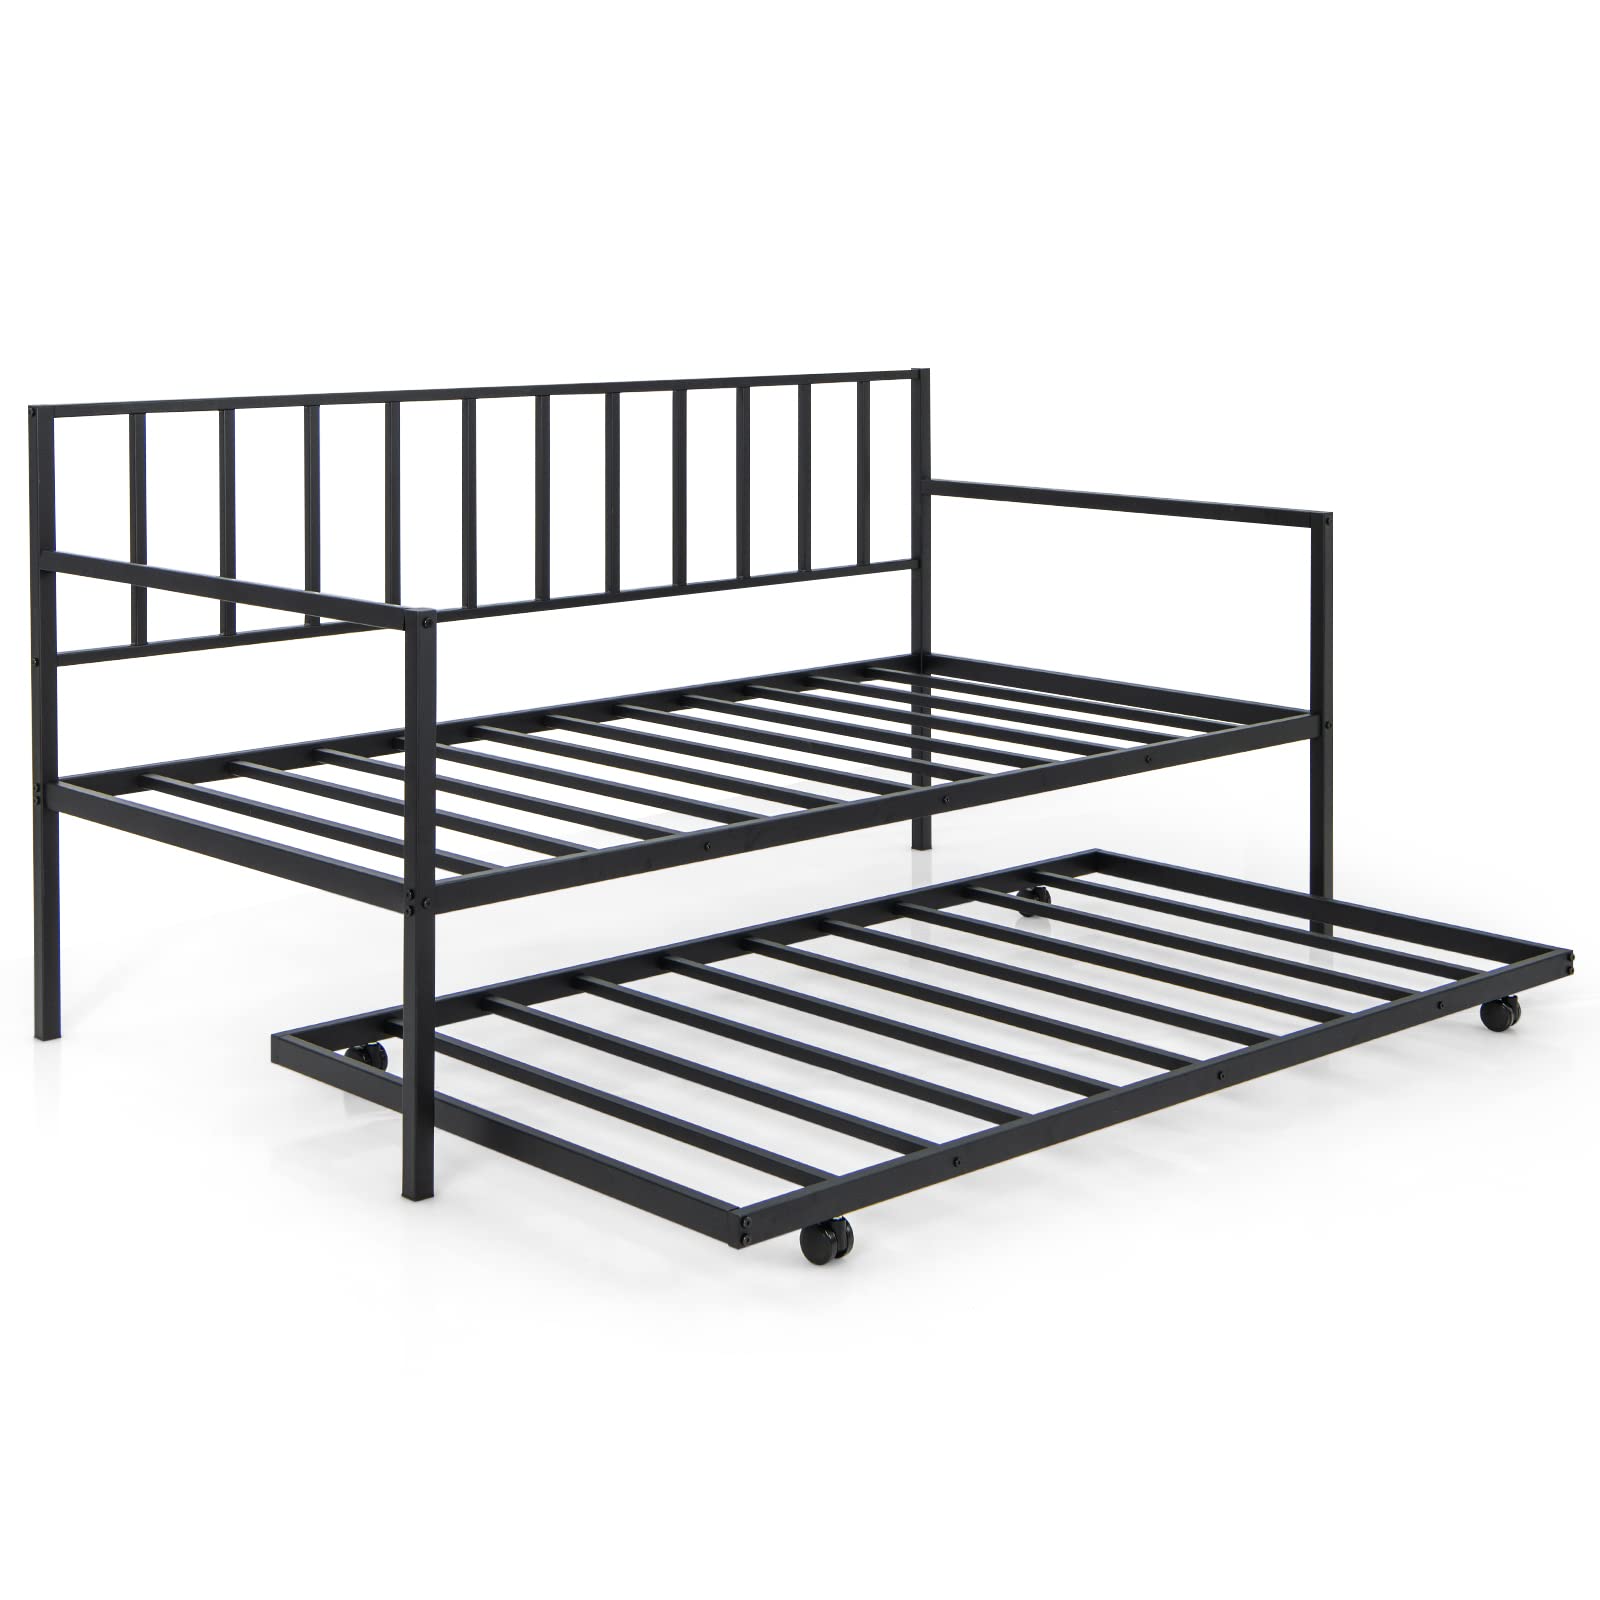 Giantex Metal Daybed with Trundle, Twin Size Daybed with Pullout Trundle & Steel Slat Support, Black